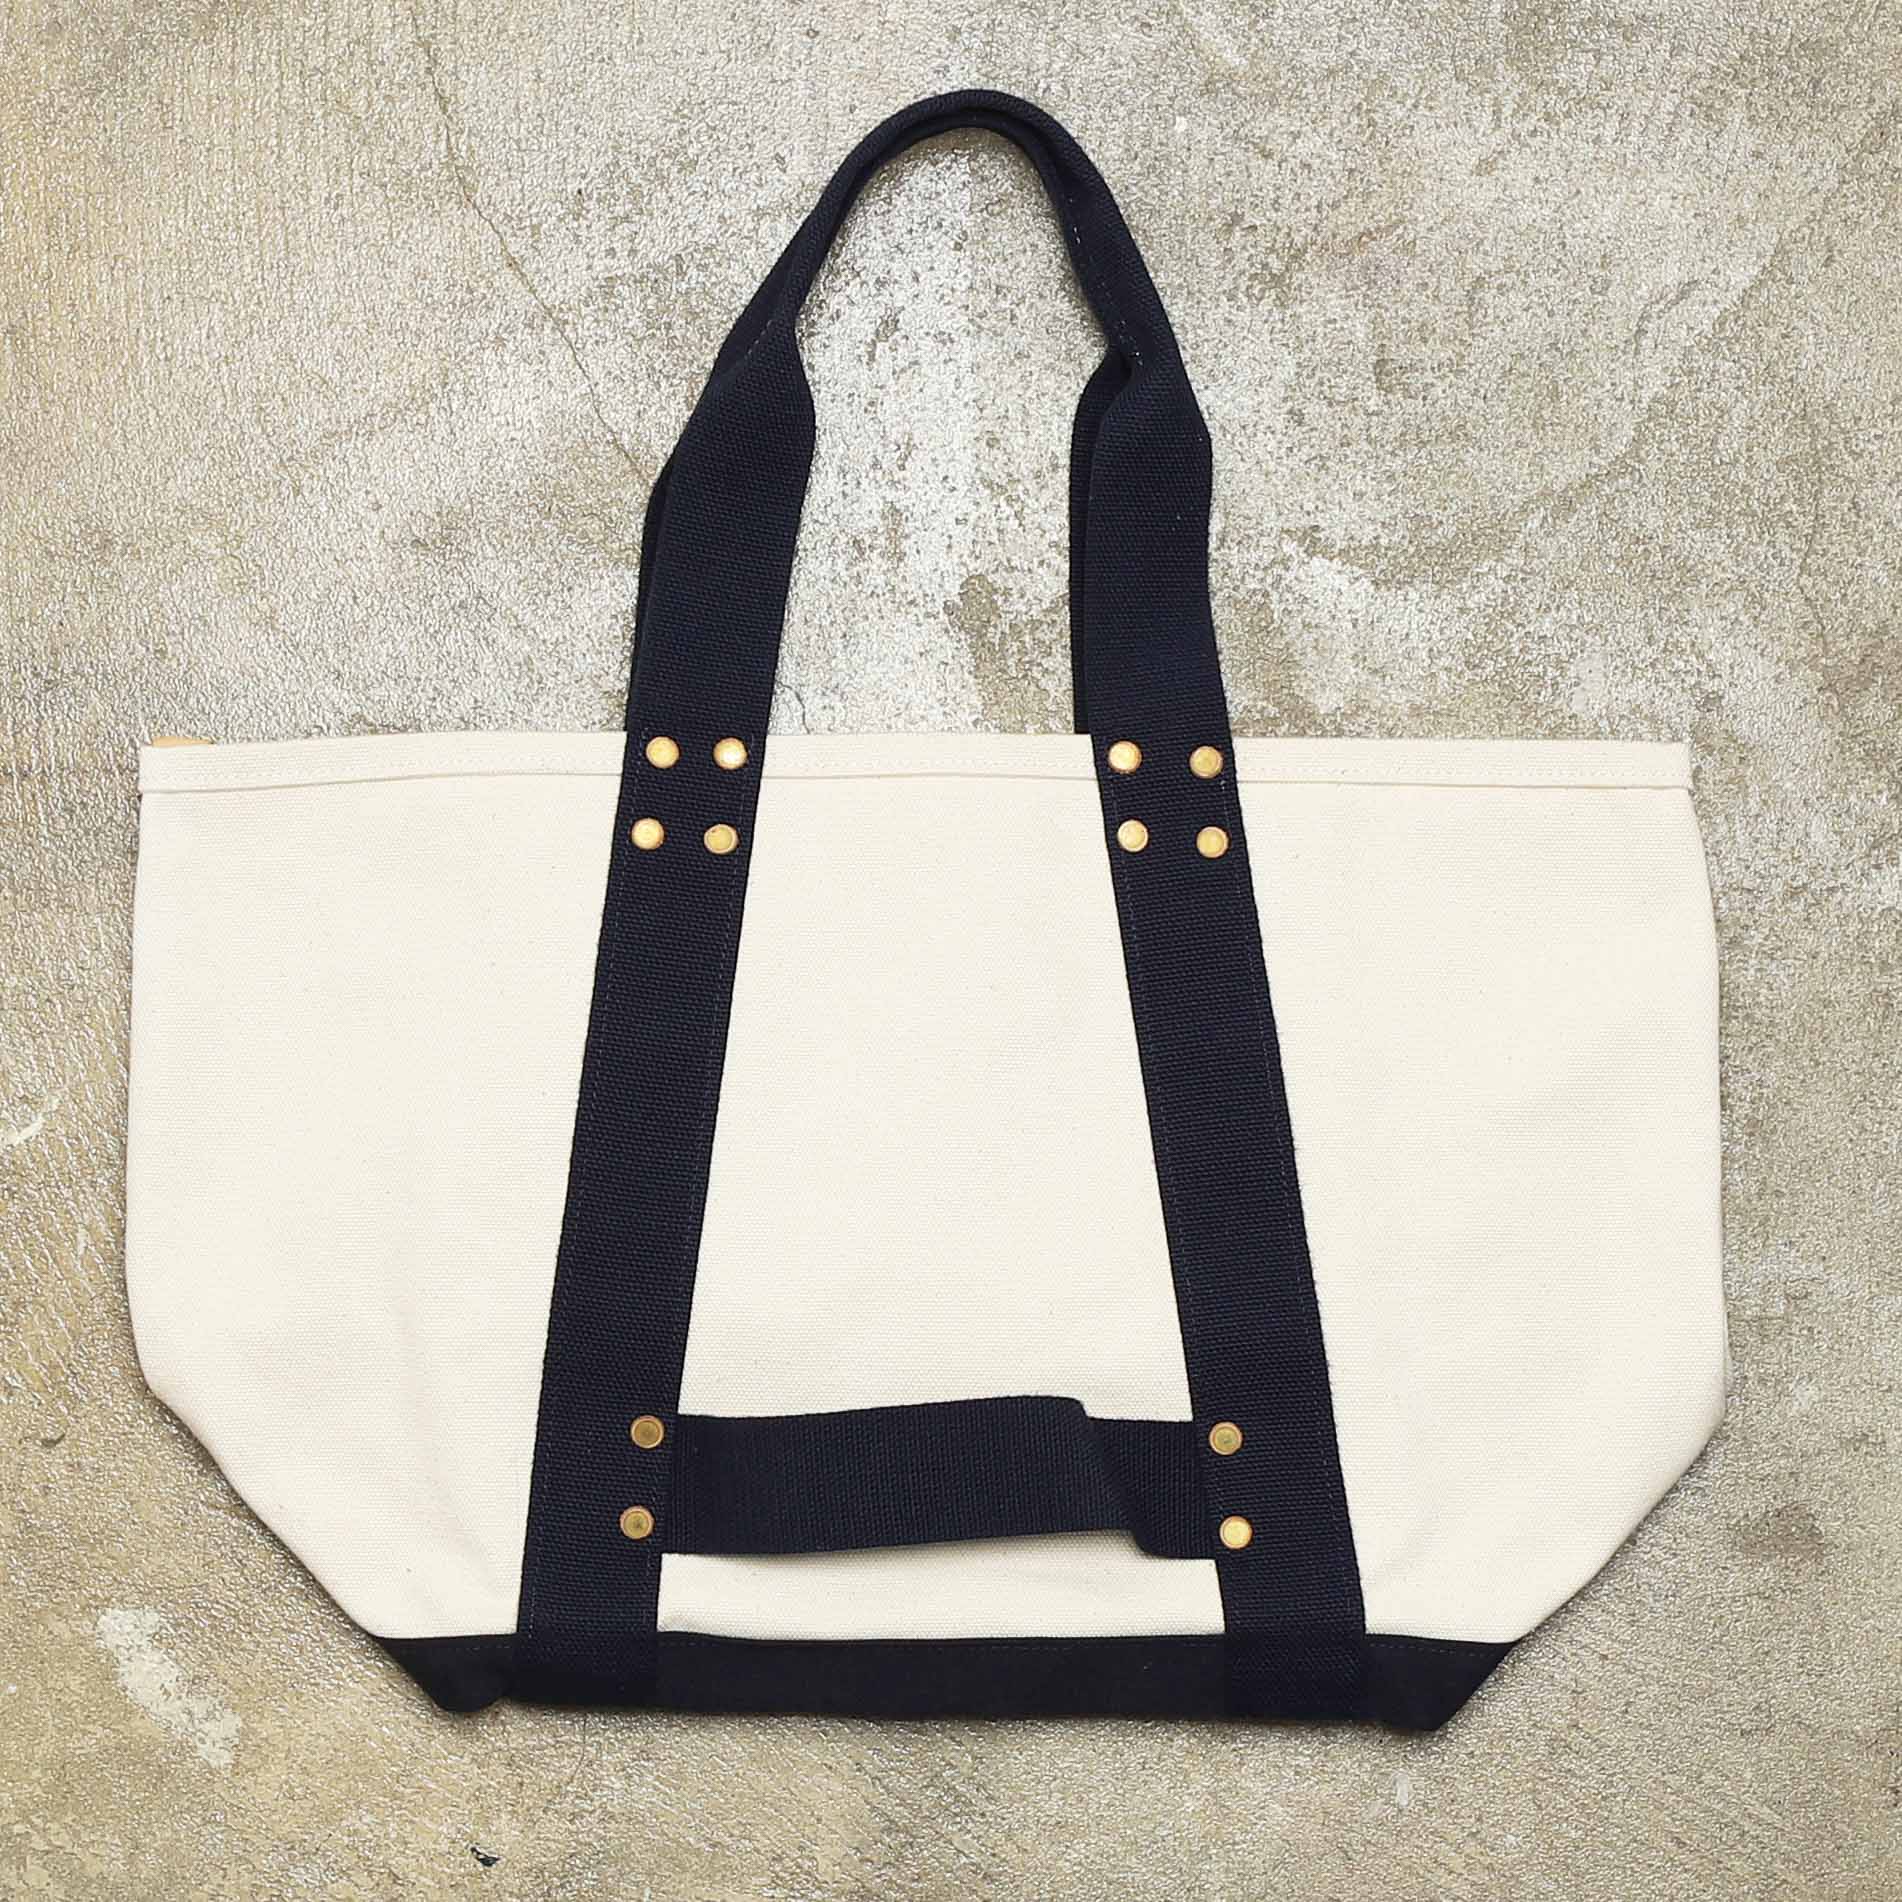 RALPH LAUREN RUGBY HEAVY CANVAS TOTE BAG - NATURAL/NAVY